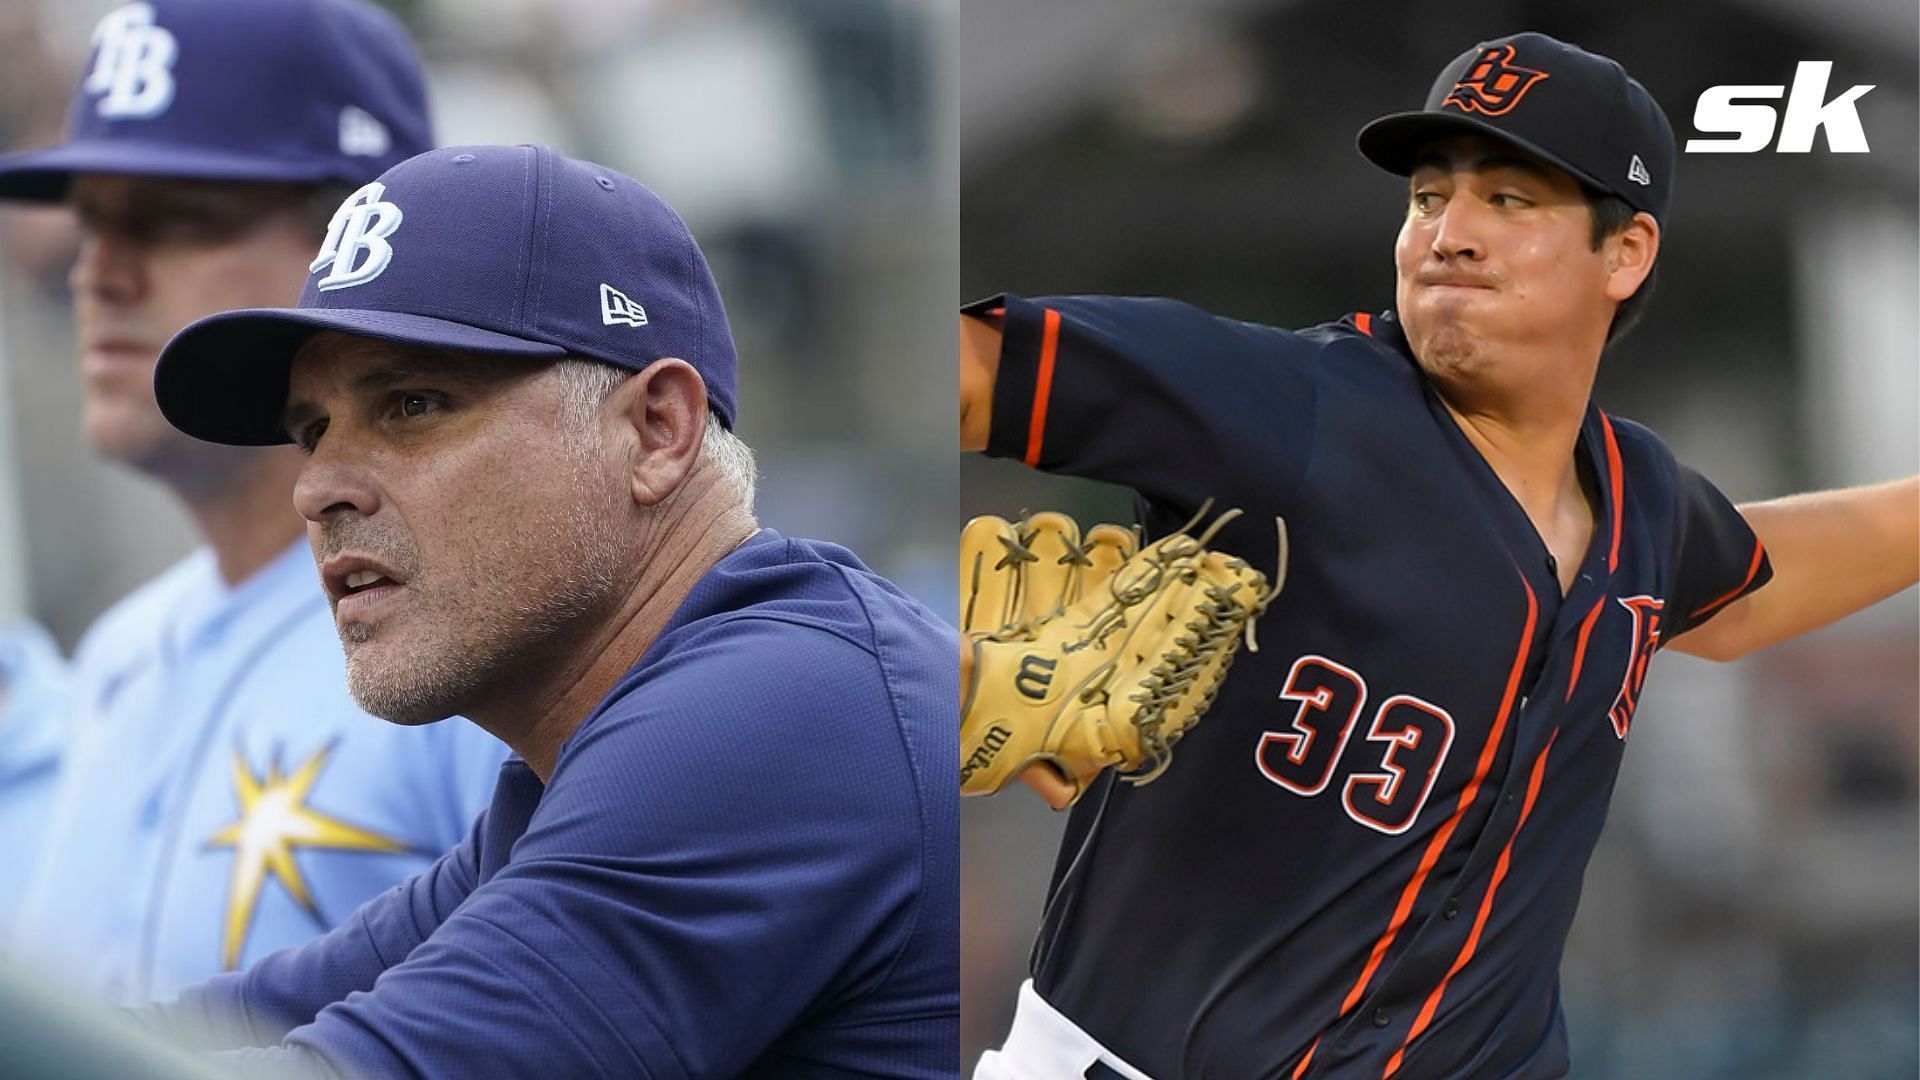 Tampa Bay Rays manager Kevin Cash will have a new bullpen arm in Jacob Lopez, who was called up to the MLB